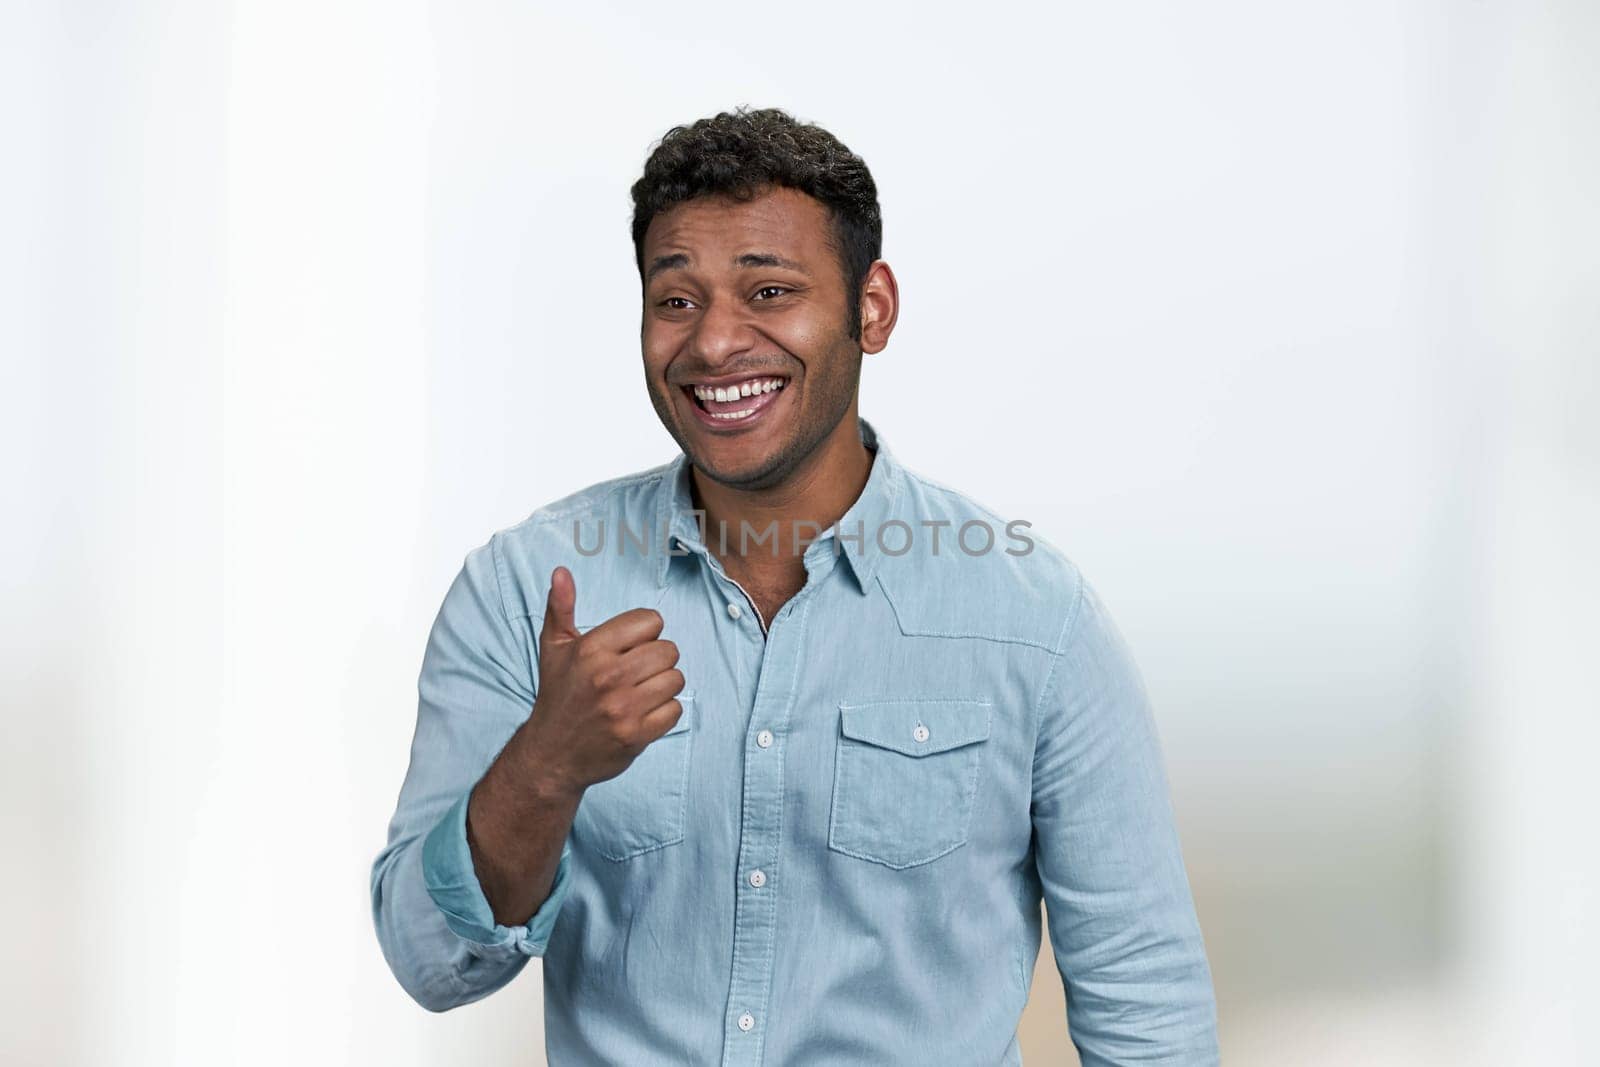 Young laughing man showing thumb up gesture standing on blurred background. Funny crazy joke. Human emotions and expressions.